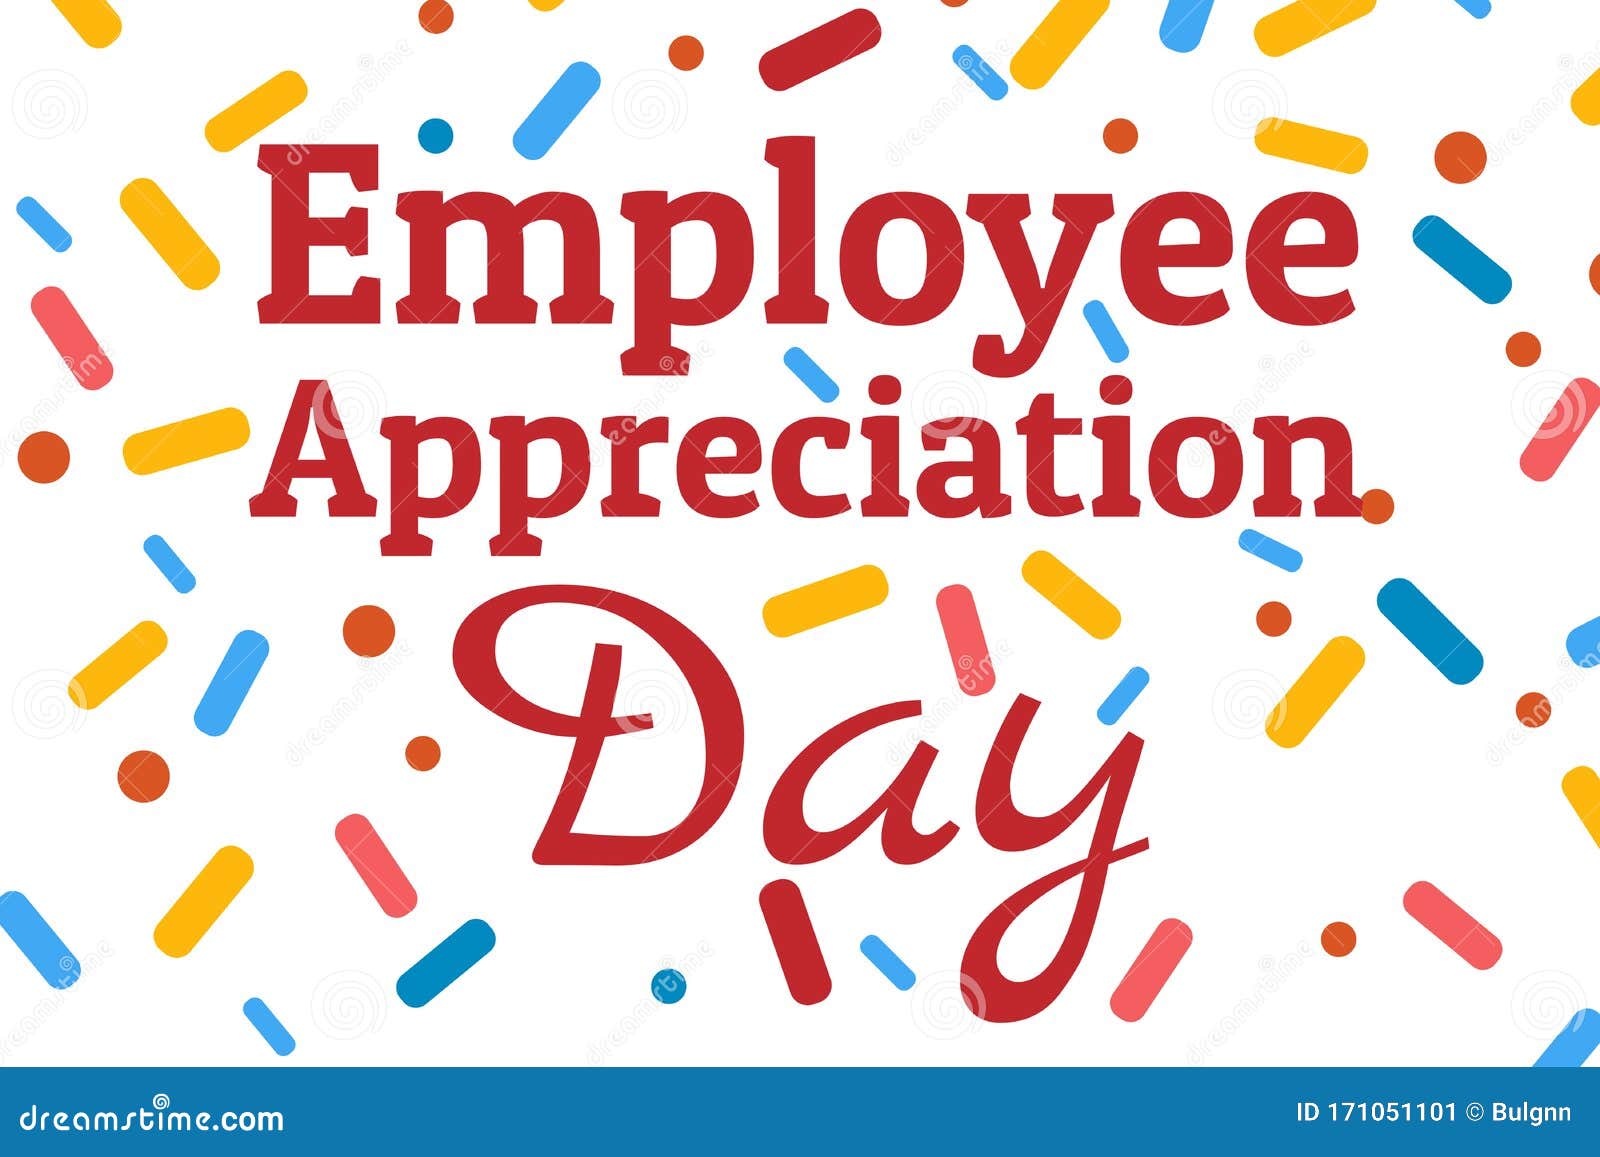 Employee Appreciation Day Concept. First Friday in March. Holiday